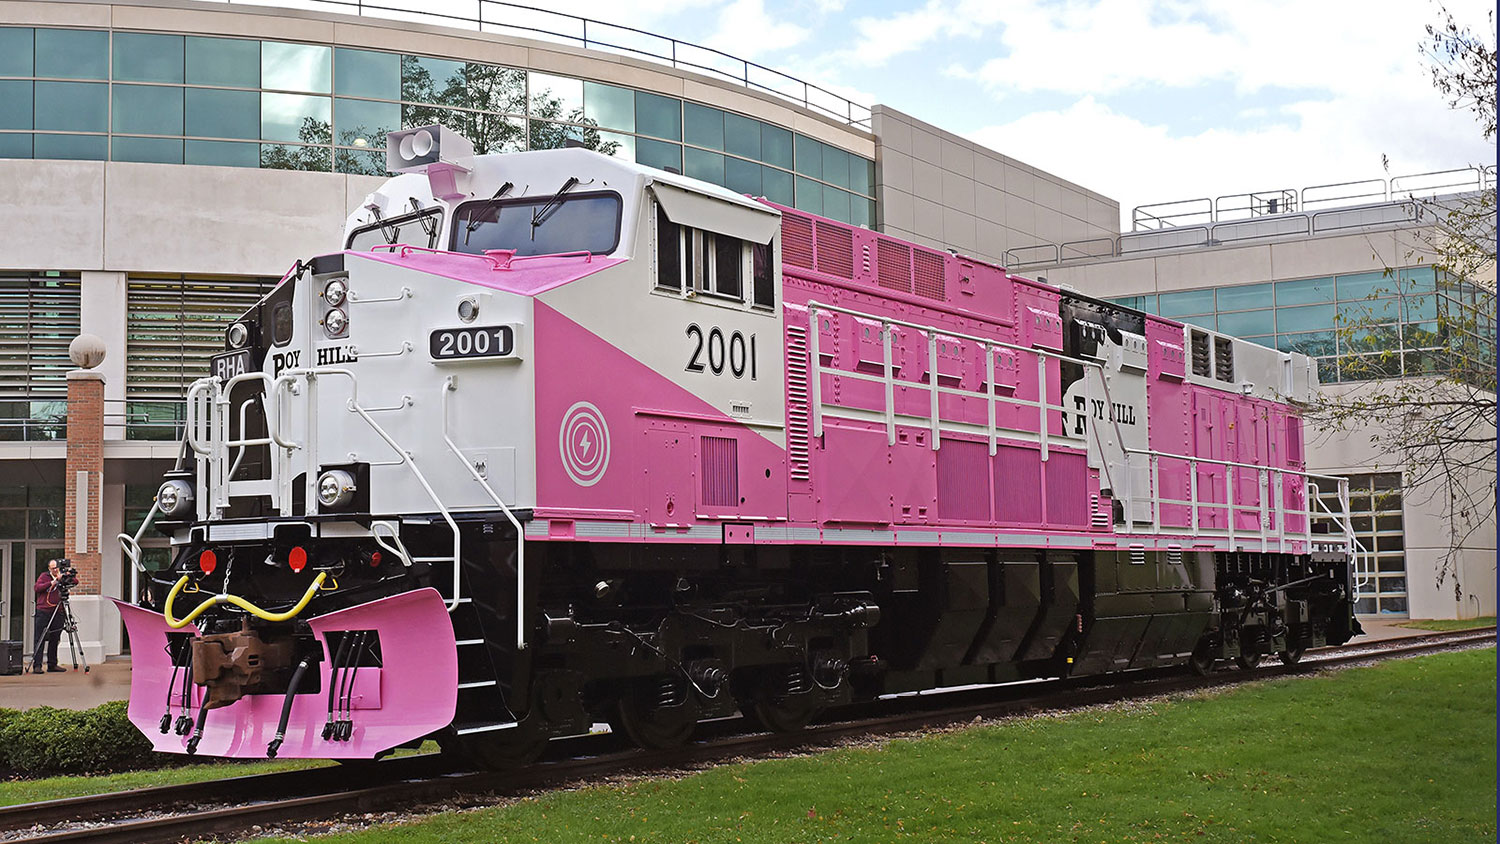 The unique, striking pink-colored locomotive was unveiled at Wabtec’s design and development center in Pennsylvania.